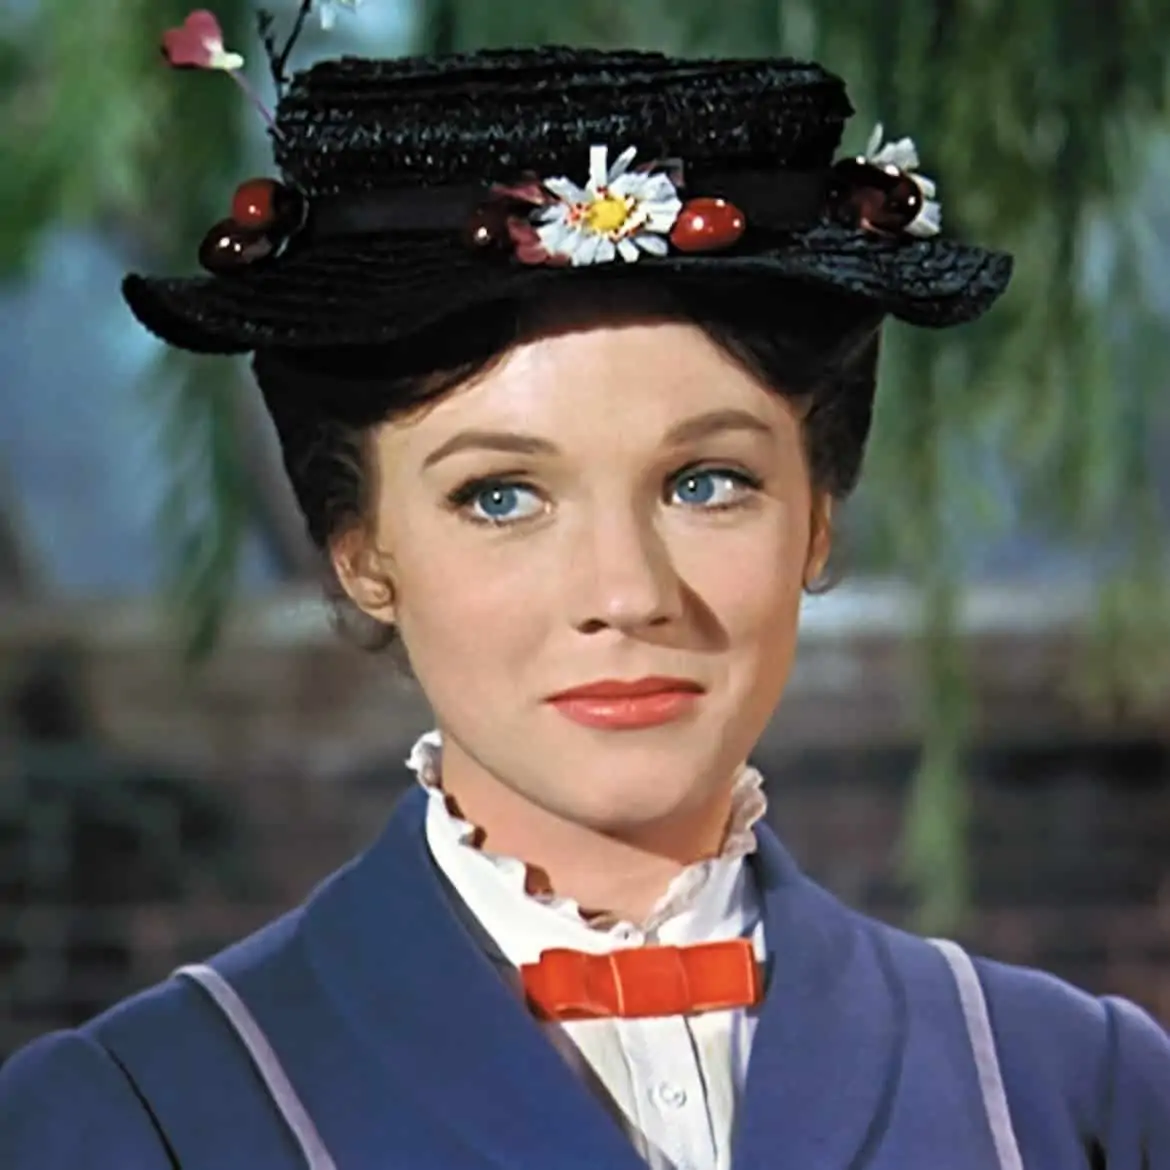 julie andrews mary poppins hat